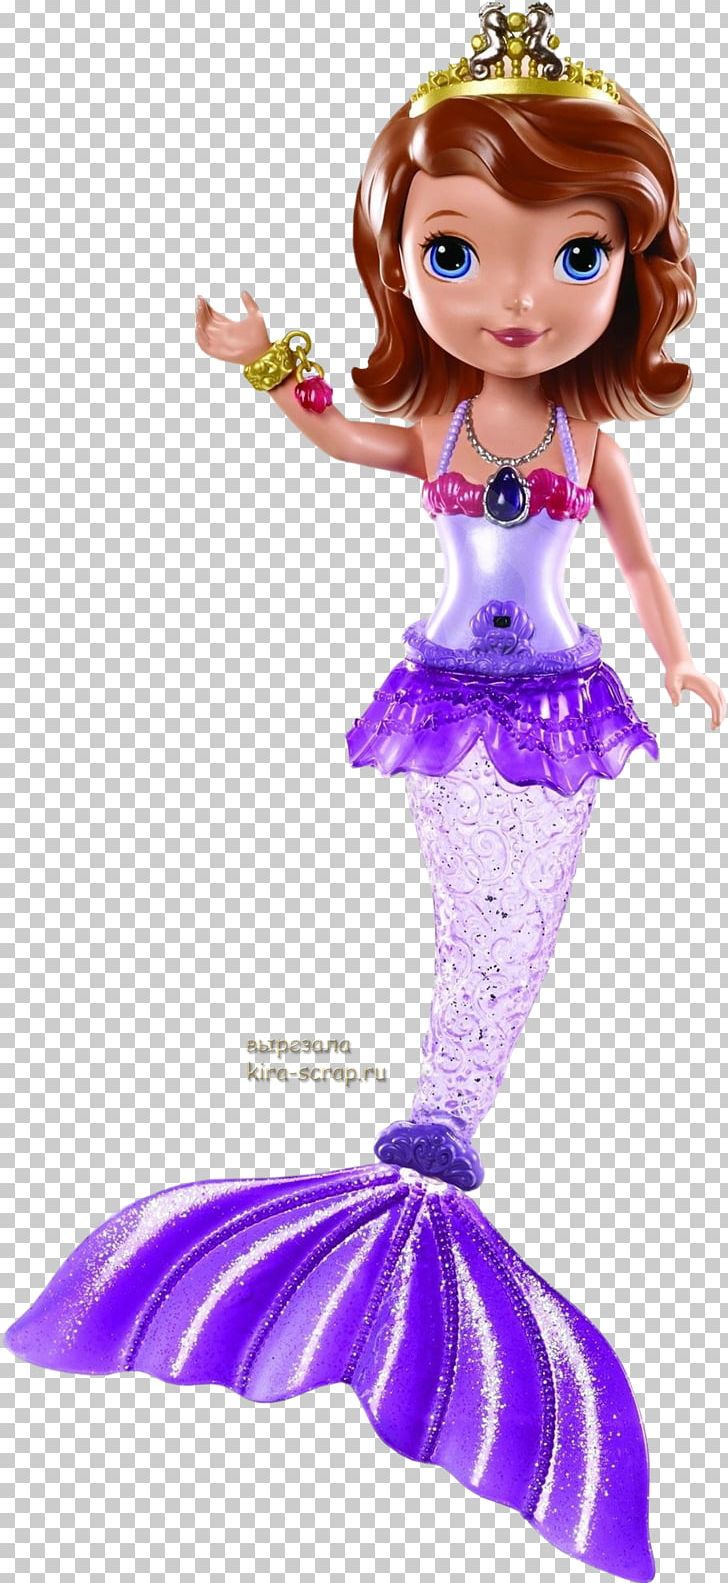 Sofia The First Amazon.com Doll Toy Mermaid PNG, Clipart, Amazoncom, Barbie, Doll, Dollhouse, Fictional Character Free PNG Download